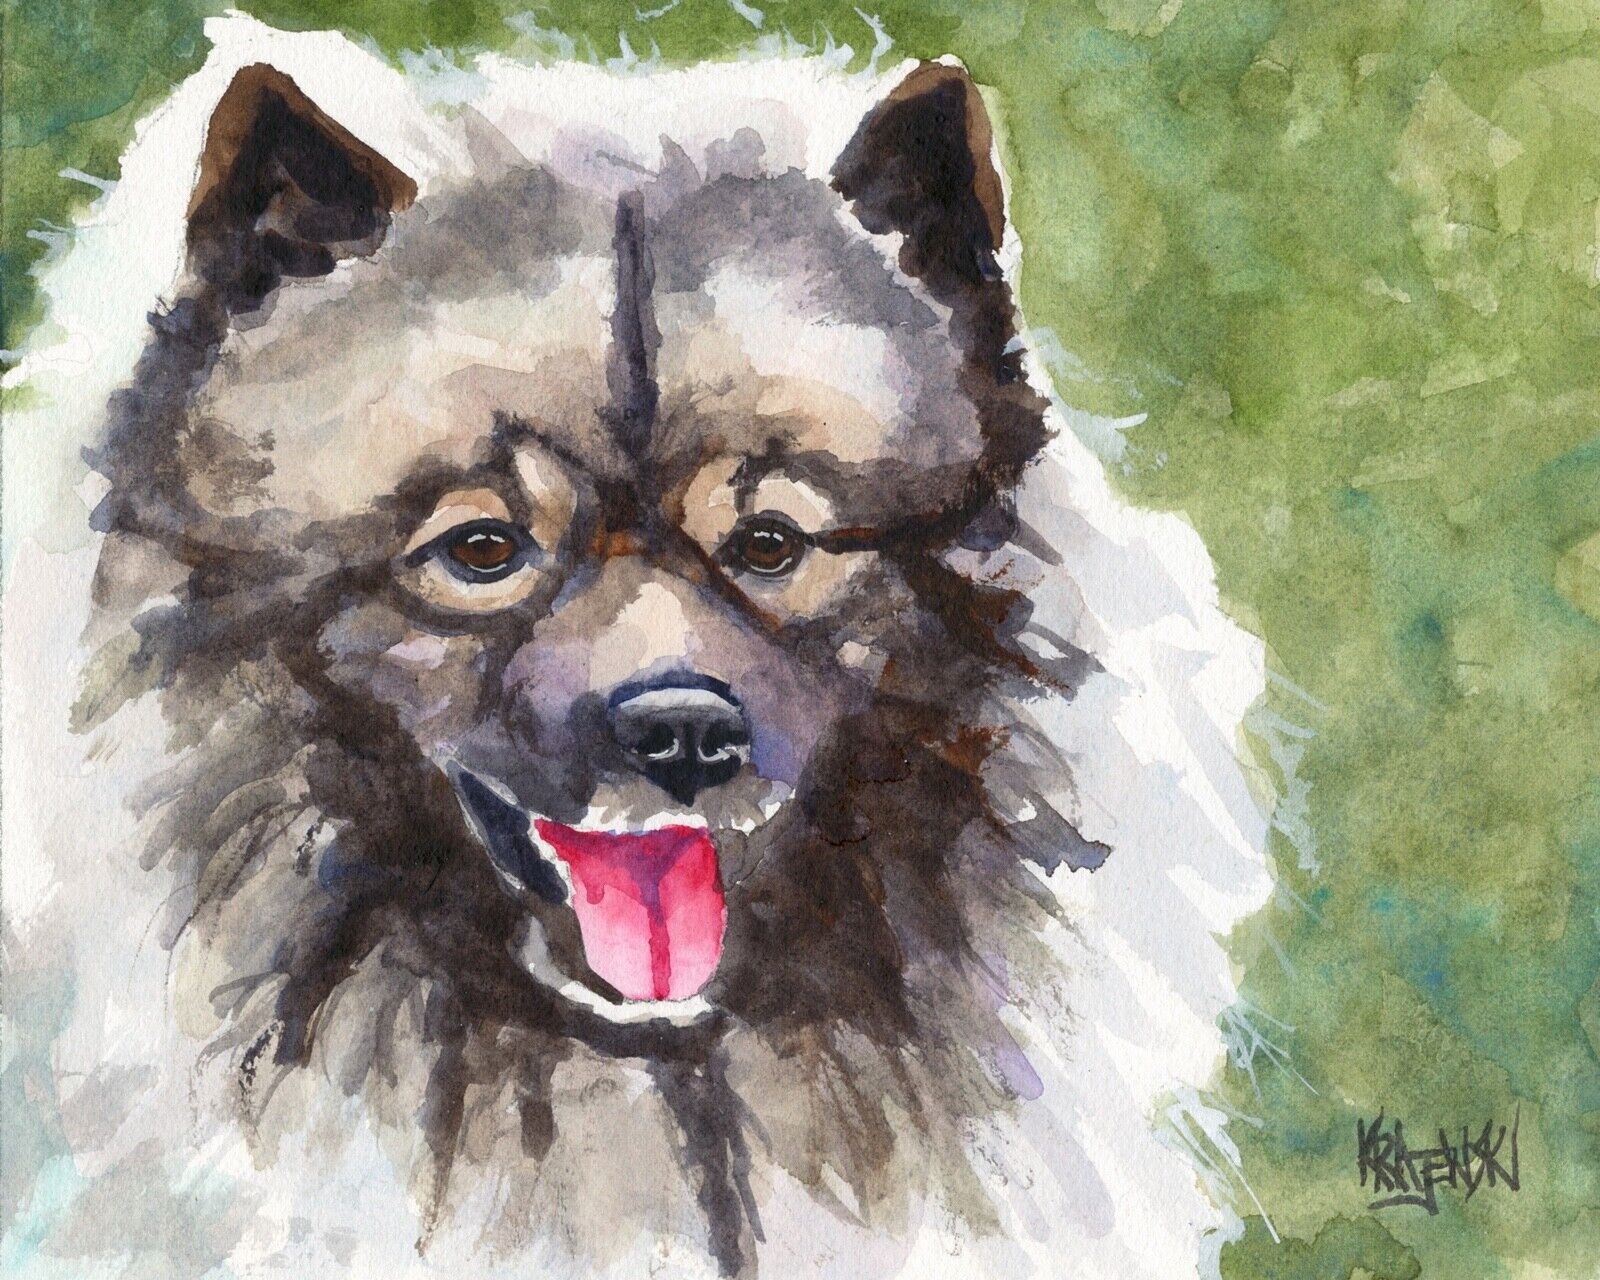 Keeshond Art Print | Keeshond Dog Gifts | From Original Painting | 8x10\